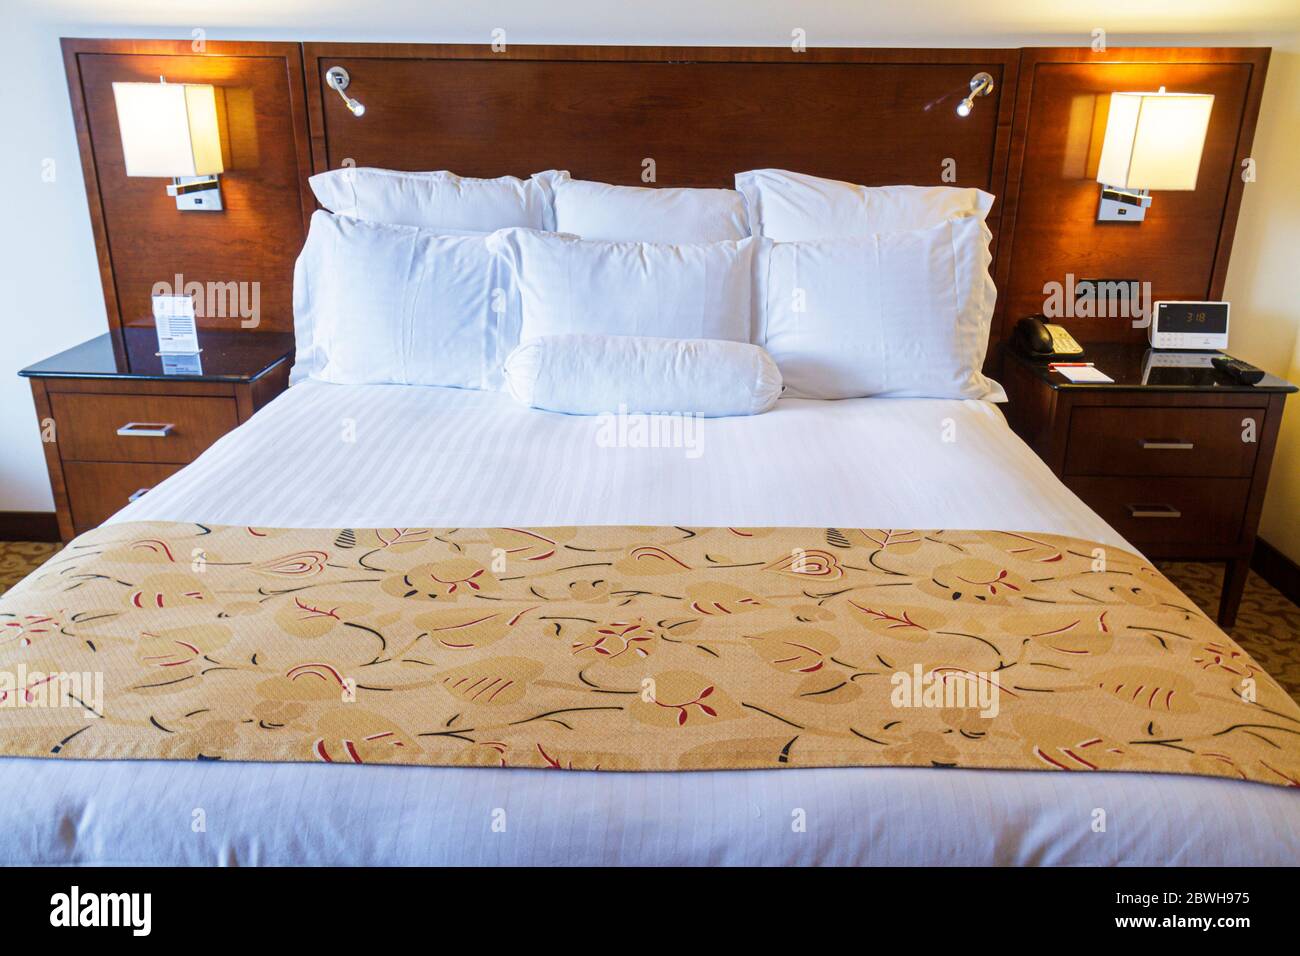 Mexico City,México Mexican,Paseo de la Reforma,Marriott Reforma,hotel,American hotel chain,hospitality,lodging,guest room,bed,bedding,nightstand,pillo Stock Photo